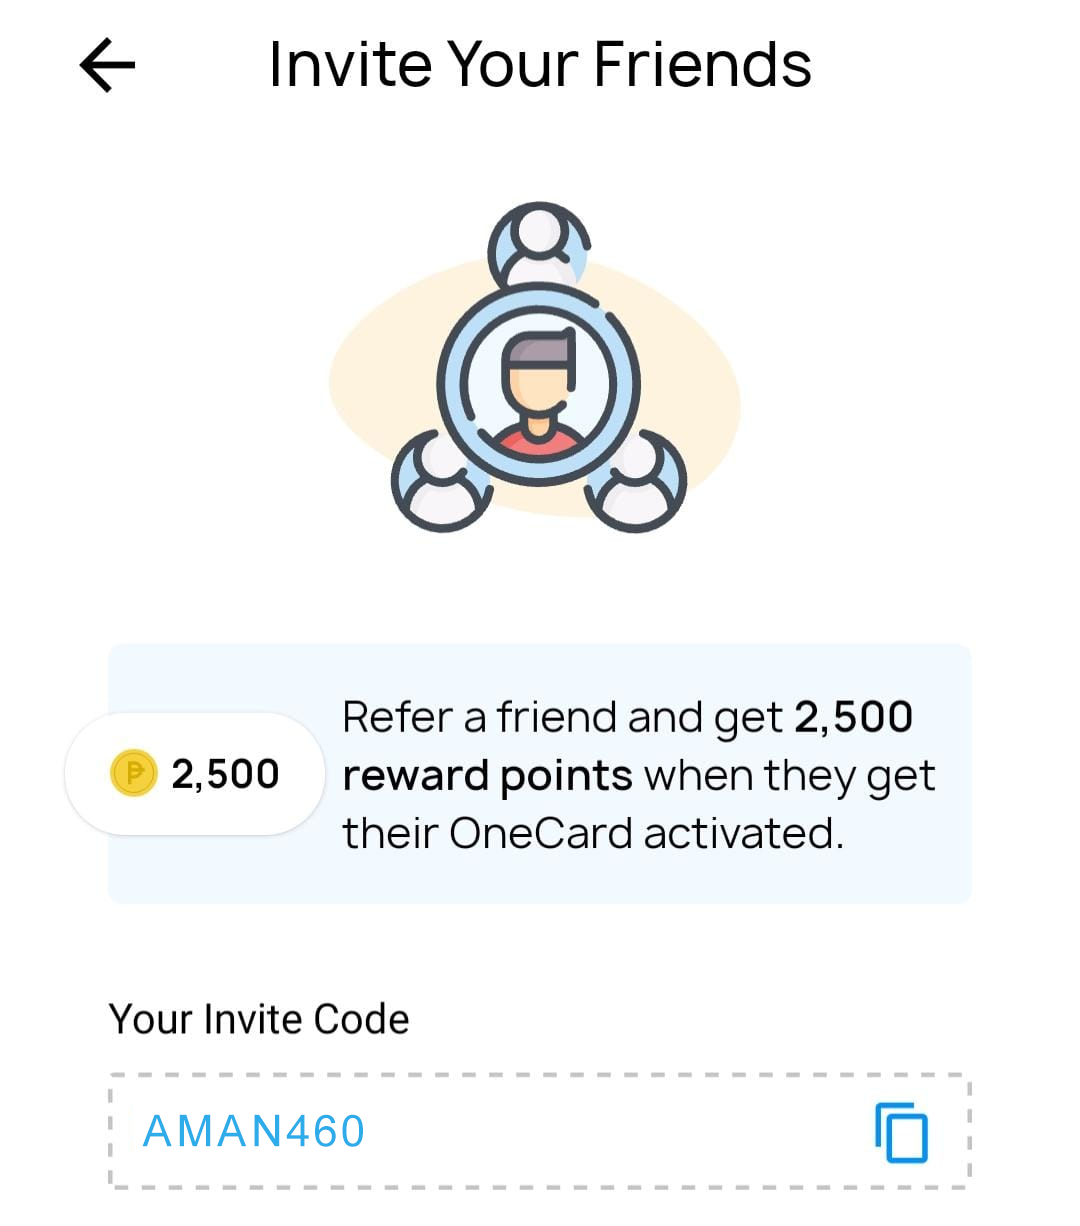 One Card Referral Code - AMAN460 - Get Exclusive Signup Bonus With OneCard Refer and Earn